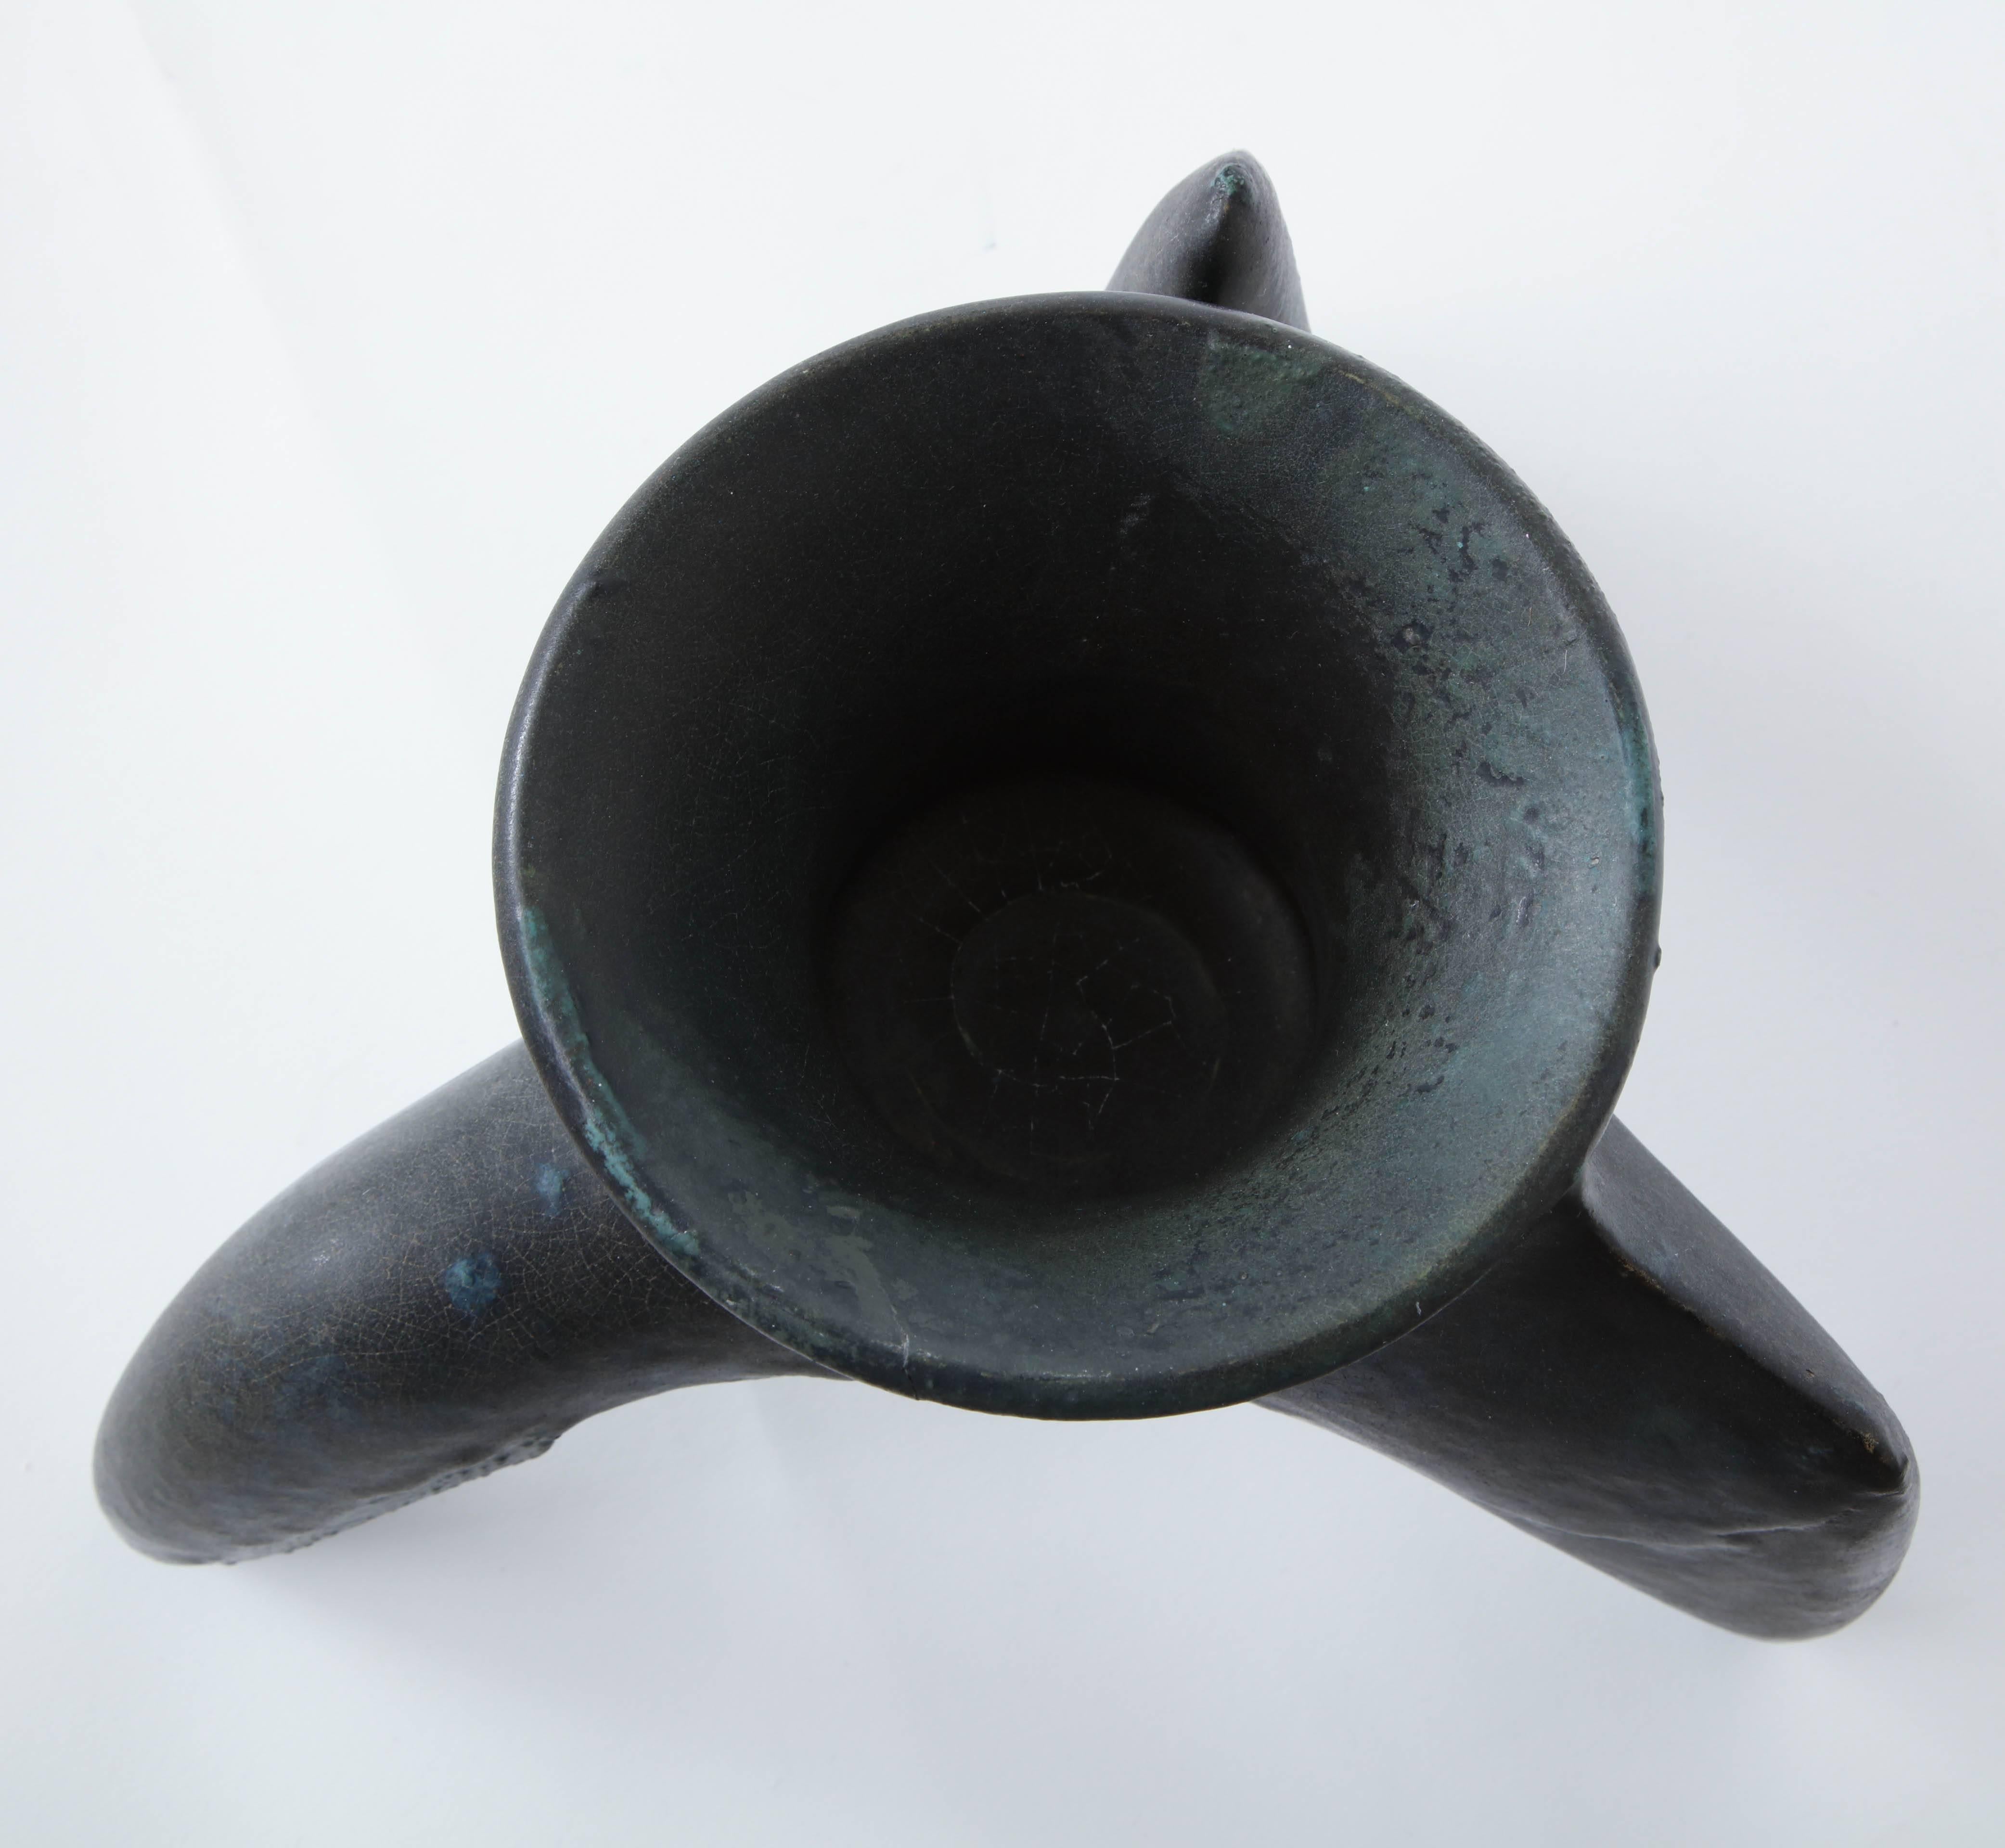 Richard Hirsch Ceramic Ceremonial Cup #34, Tripod Vessels Collection, 1985 In Good Condition For Sale In New York, NY